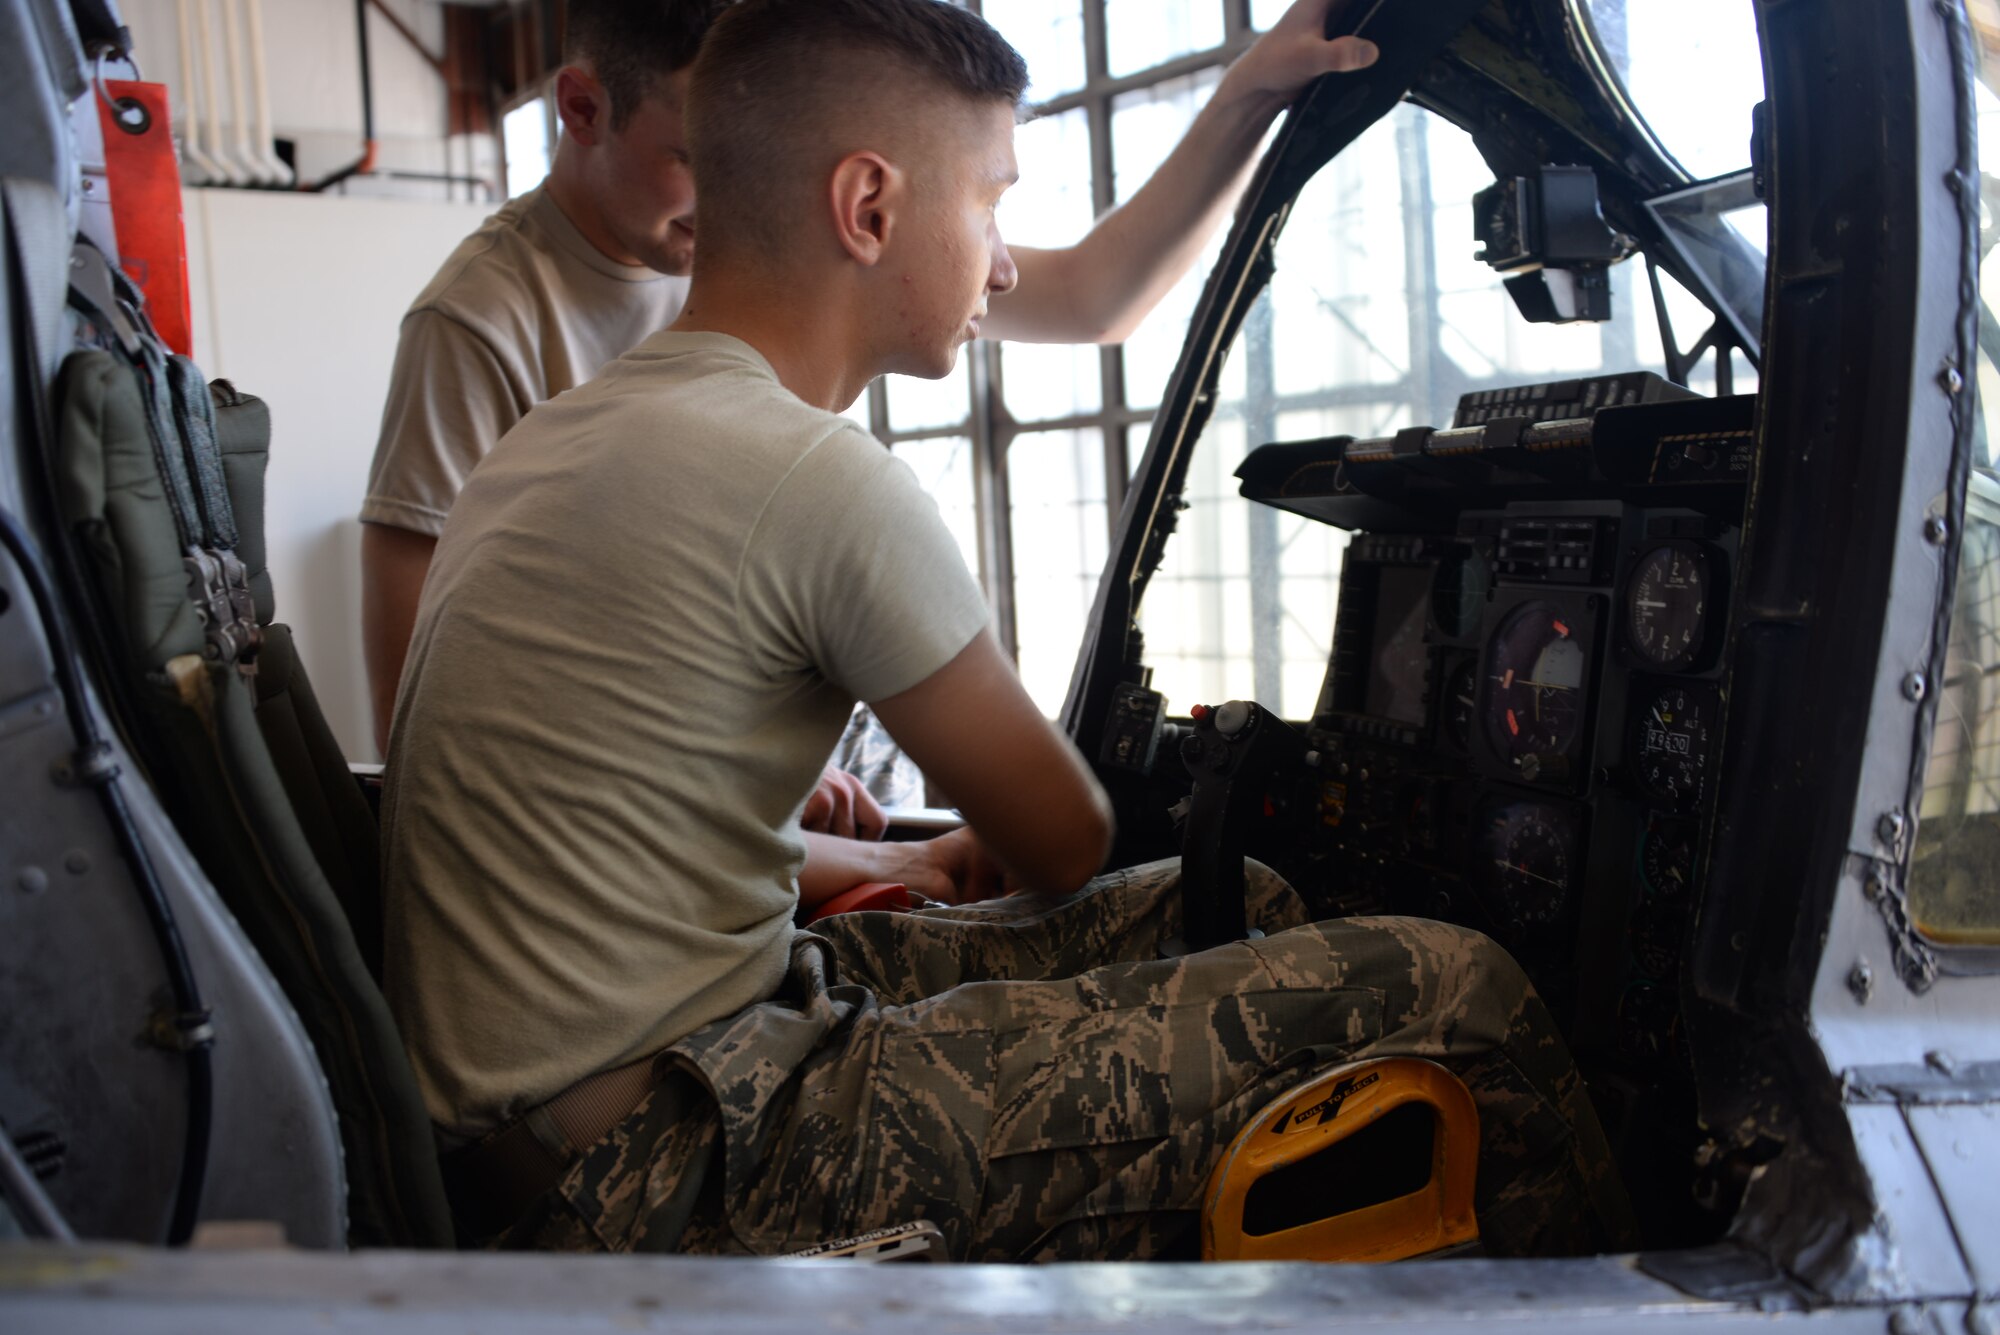 Airmen Corbin Broglio and Tryston Stanfield, 362nd Training Squadron A-10 crew chief apprentice course students, work on raising the windshield to allow access to the avionics boxes. Avionics boxes would need to be accessible during and electronic malfunction. (U.S. Air Force phot by Senior Airman Robert L. McIlrath)